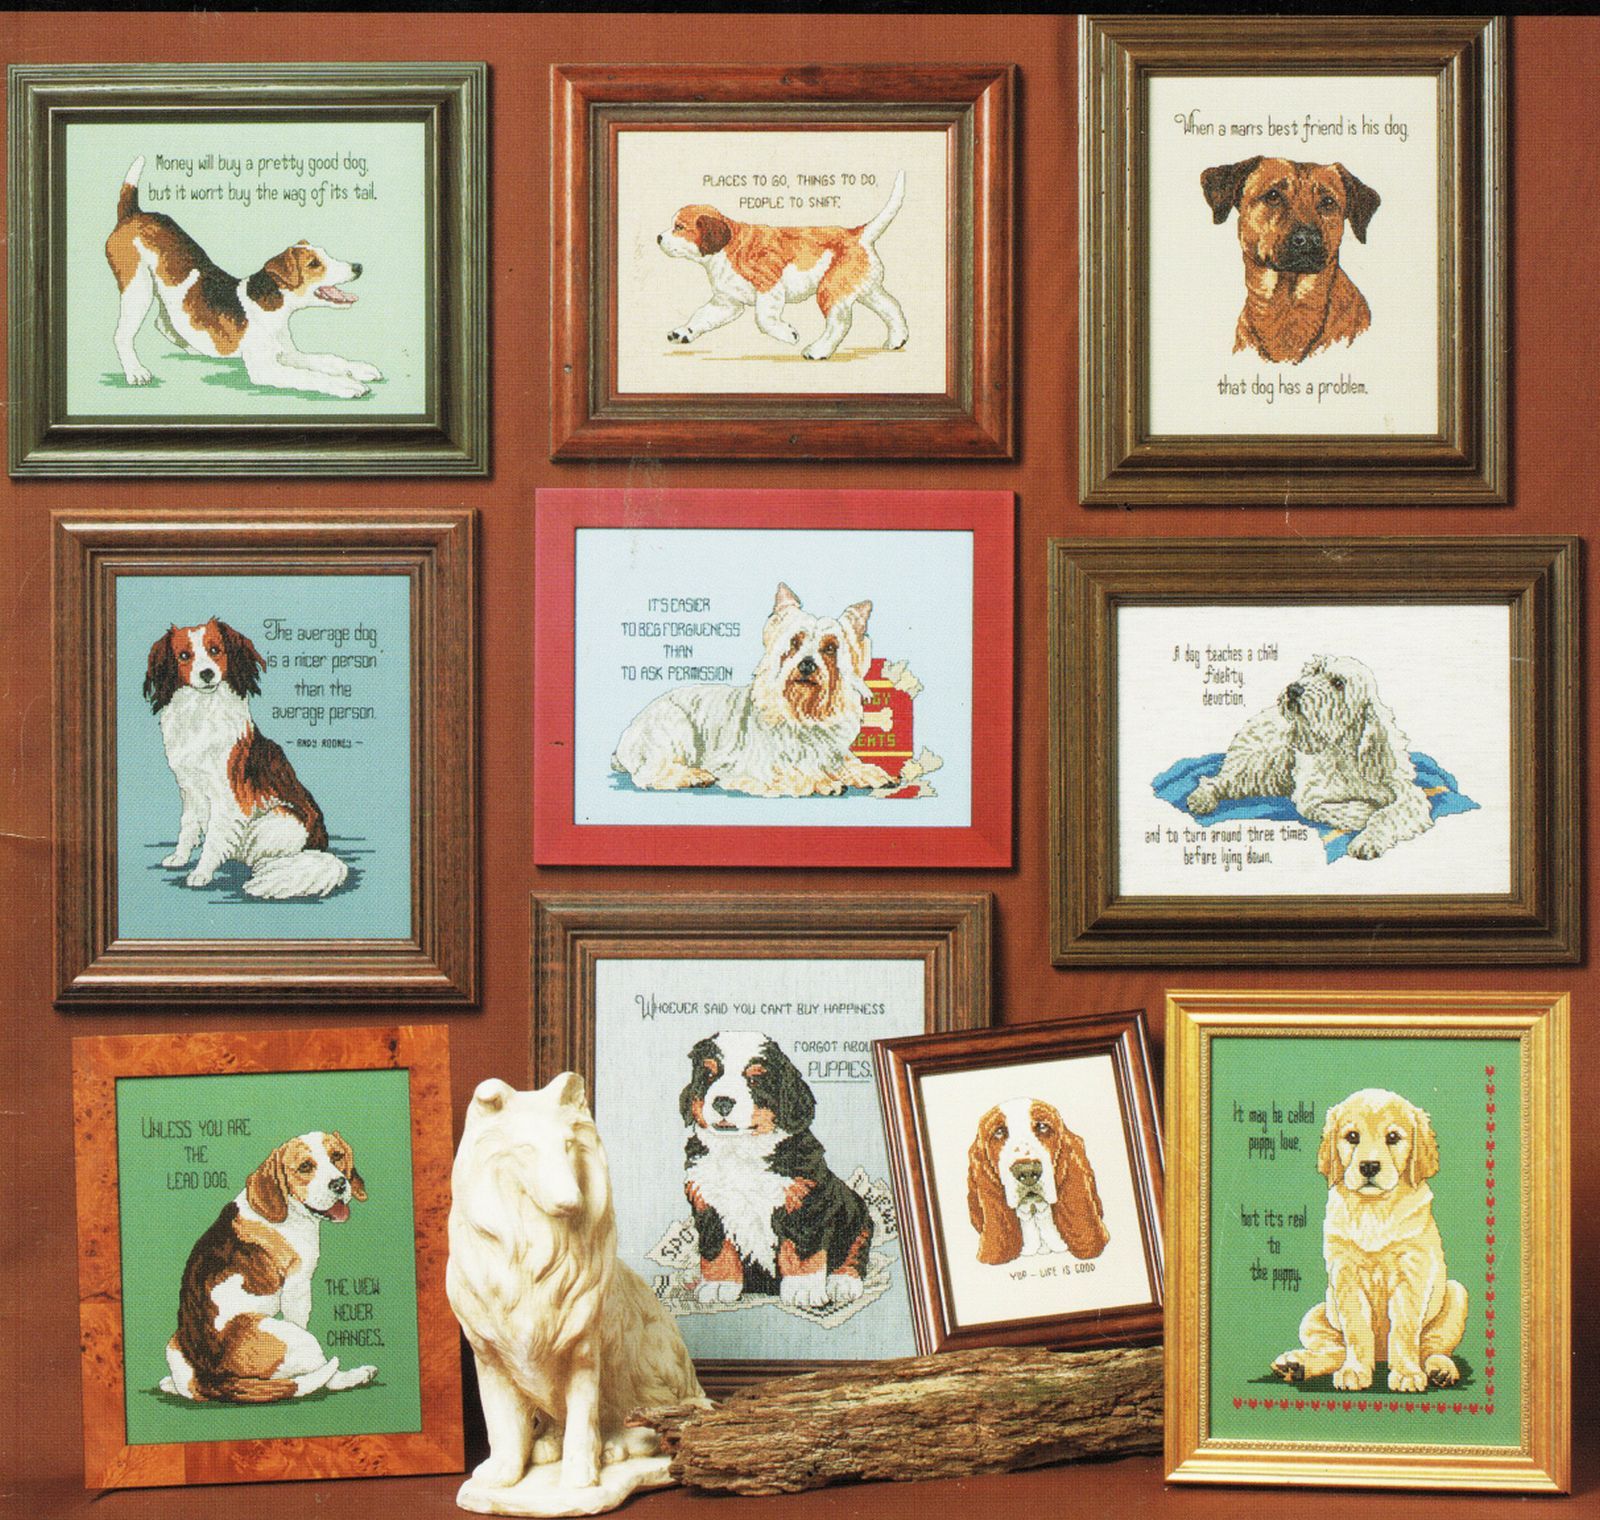 Cross Stitch Tailwaggers #1 Dog Puppy Sayings Jeanette Crews Designs Patterns - $13.99